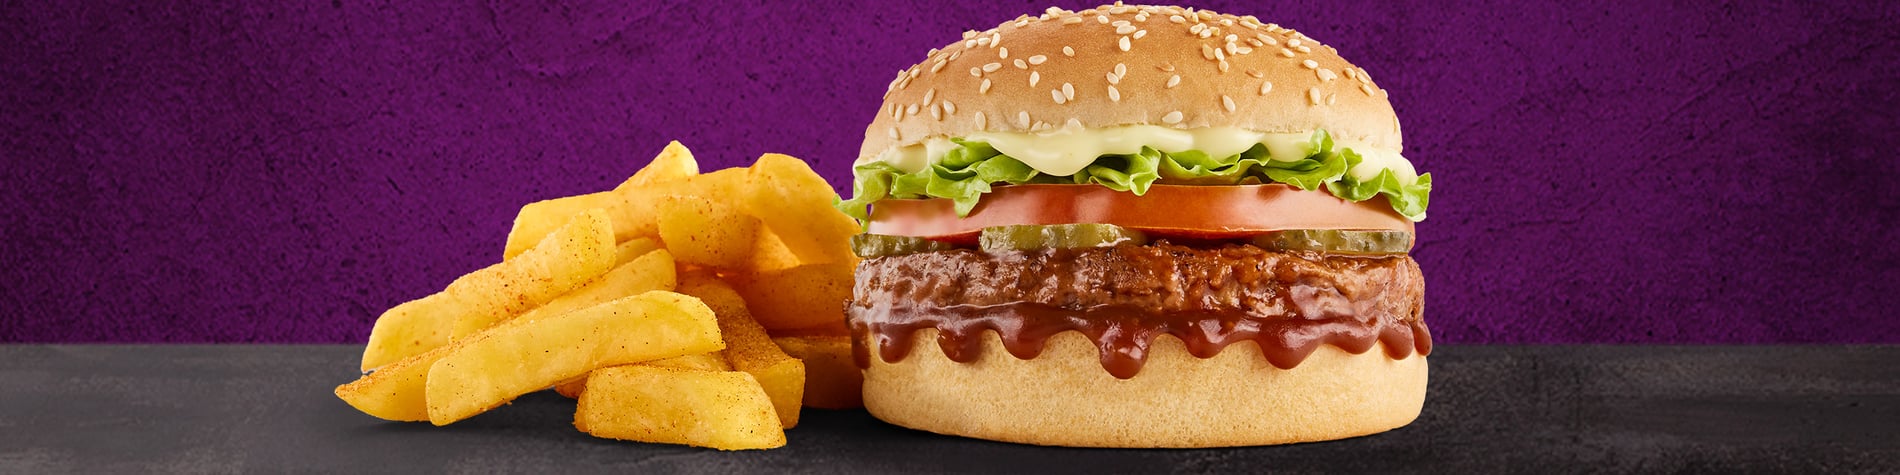 The NEW Mo’MjojoTM Burger Meal from Steers® BP Libradene Kiosk. 2 Flame-Grilled pure beef patties, pineapple, macon, tomato, lettuce, and small Famous Hand-Cut Chips, on a purple background.